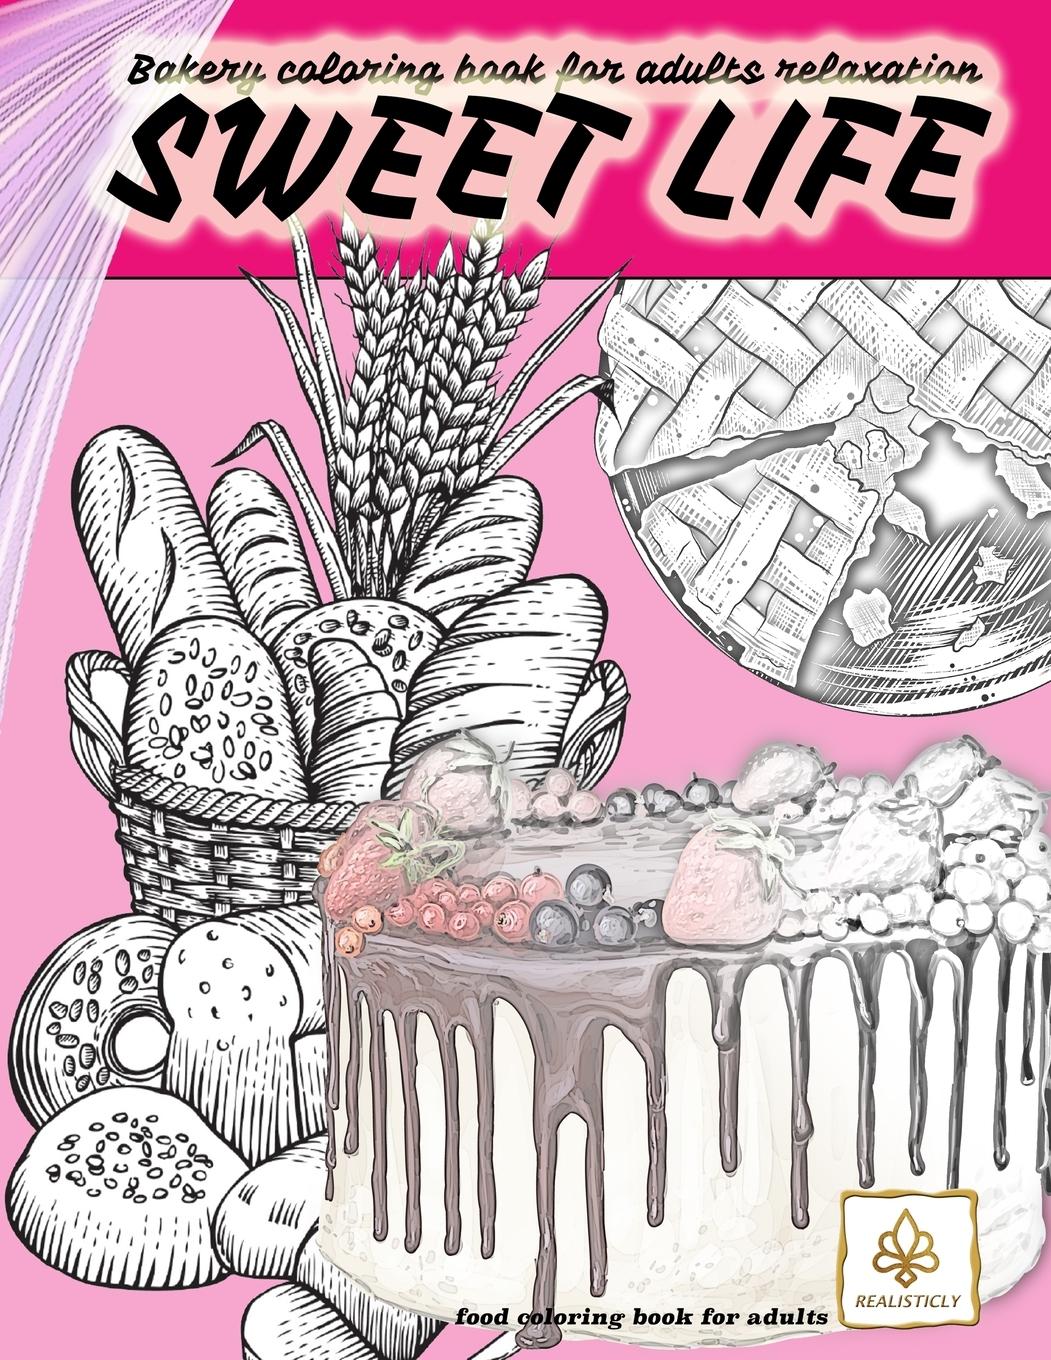 SWEET LIFE BAKERY coloring book for adults relaxation food coloring book for adults - Realisticly